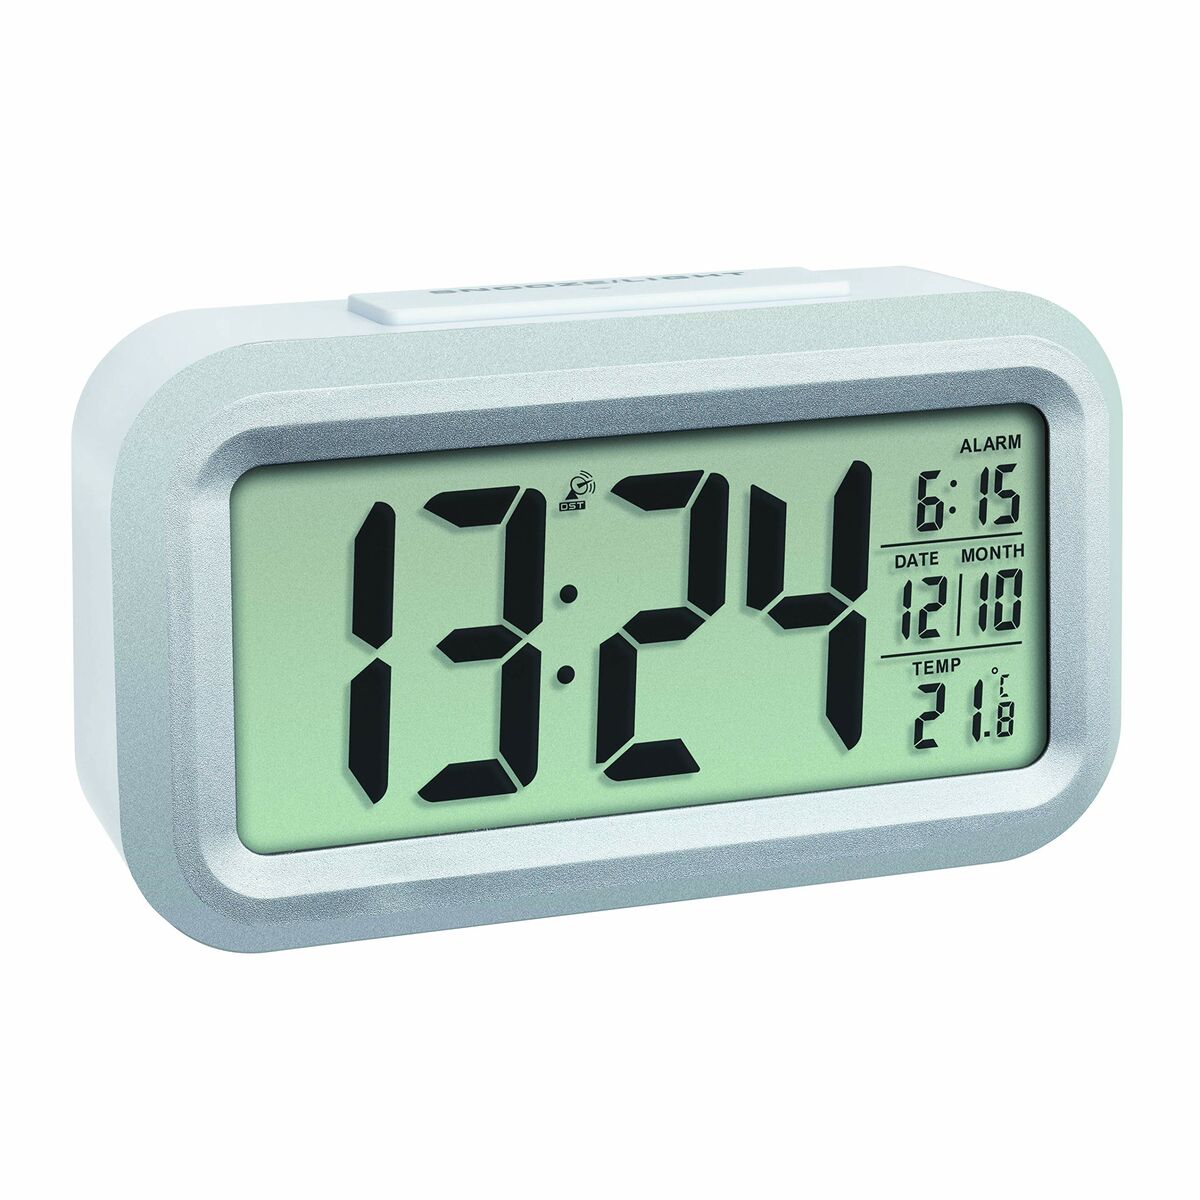 Alarm clock White (Refurbished Products A)